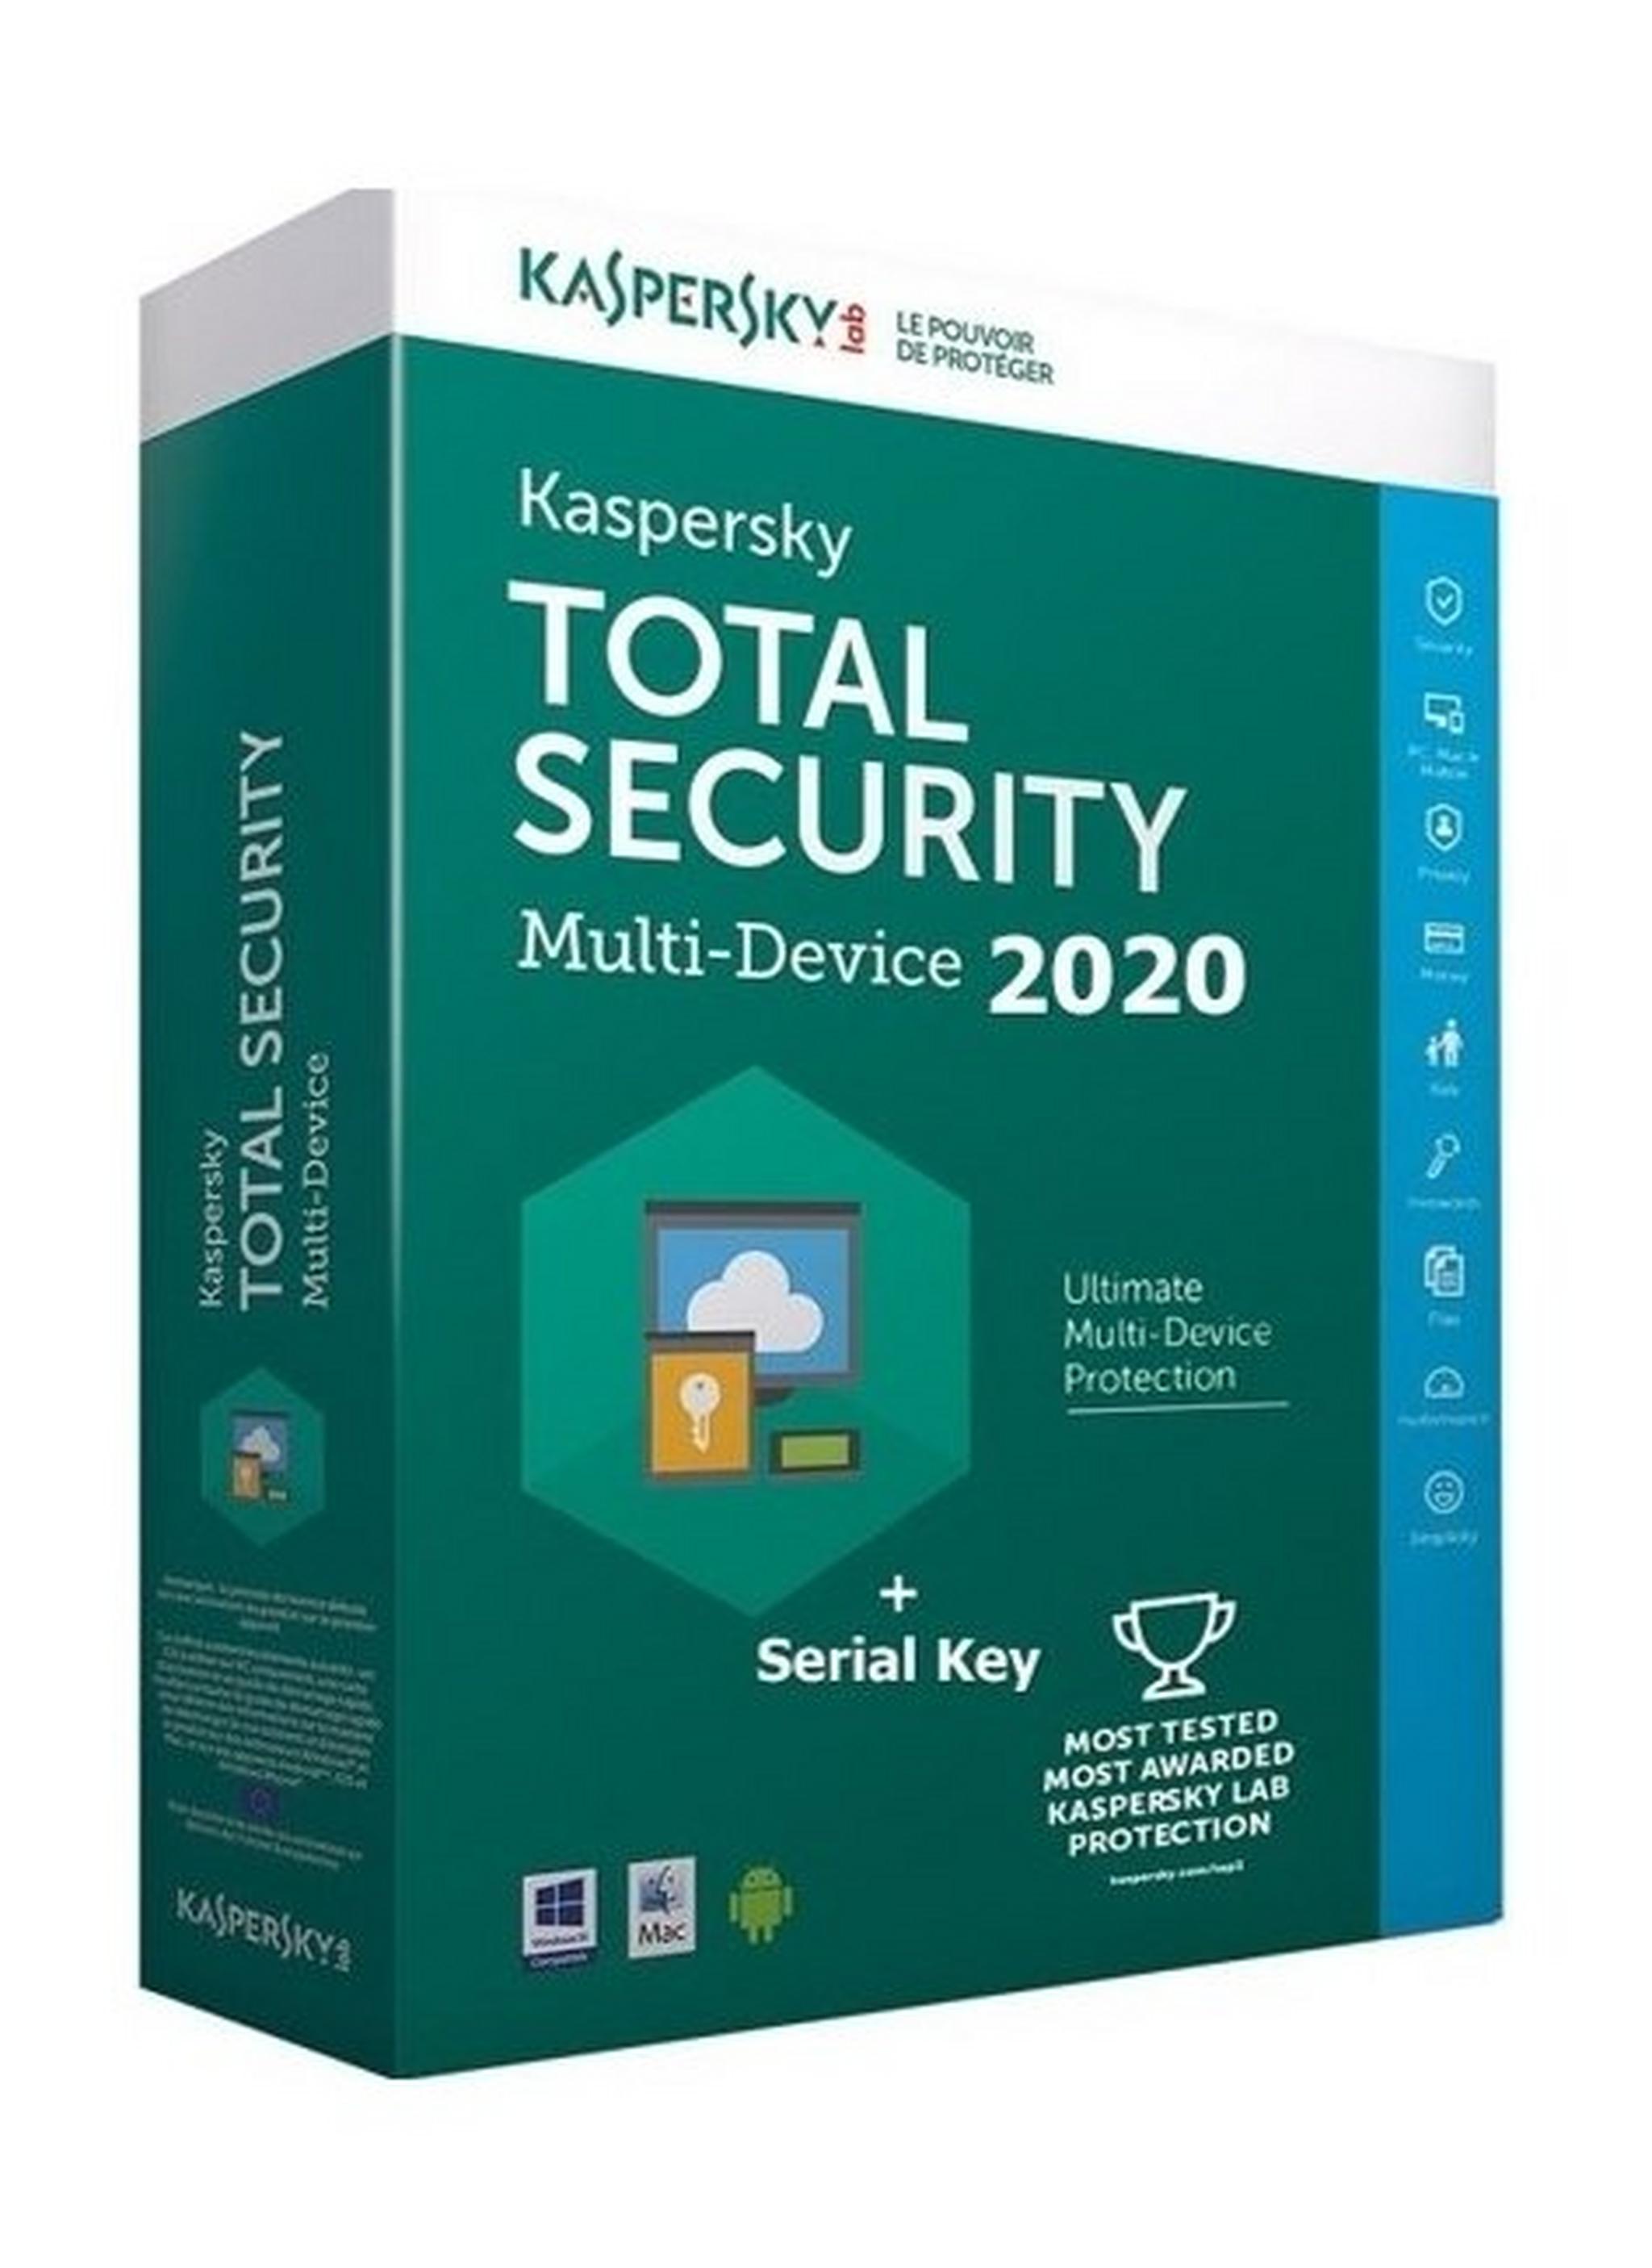 Kaspersky 1 Year Total Security 2020 - 4 Devices